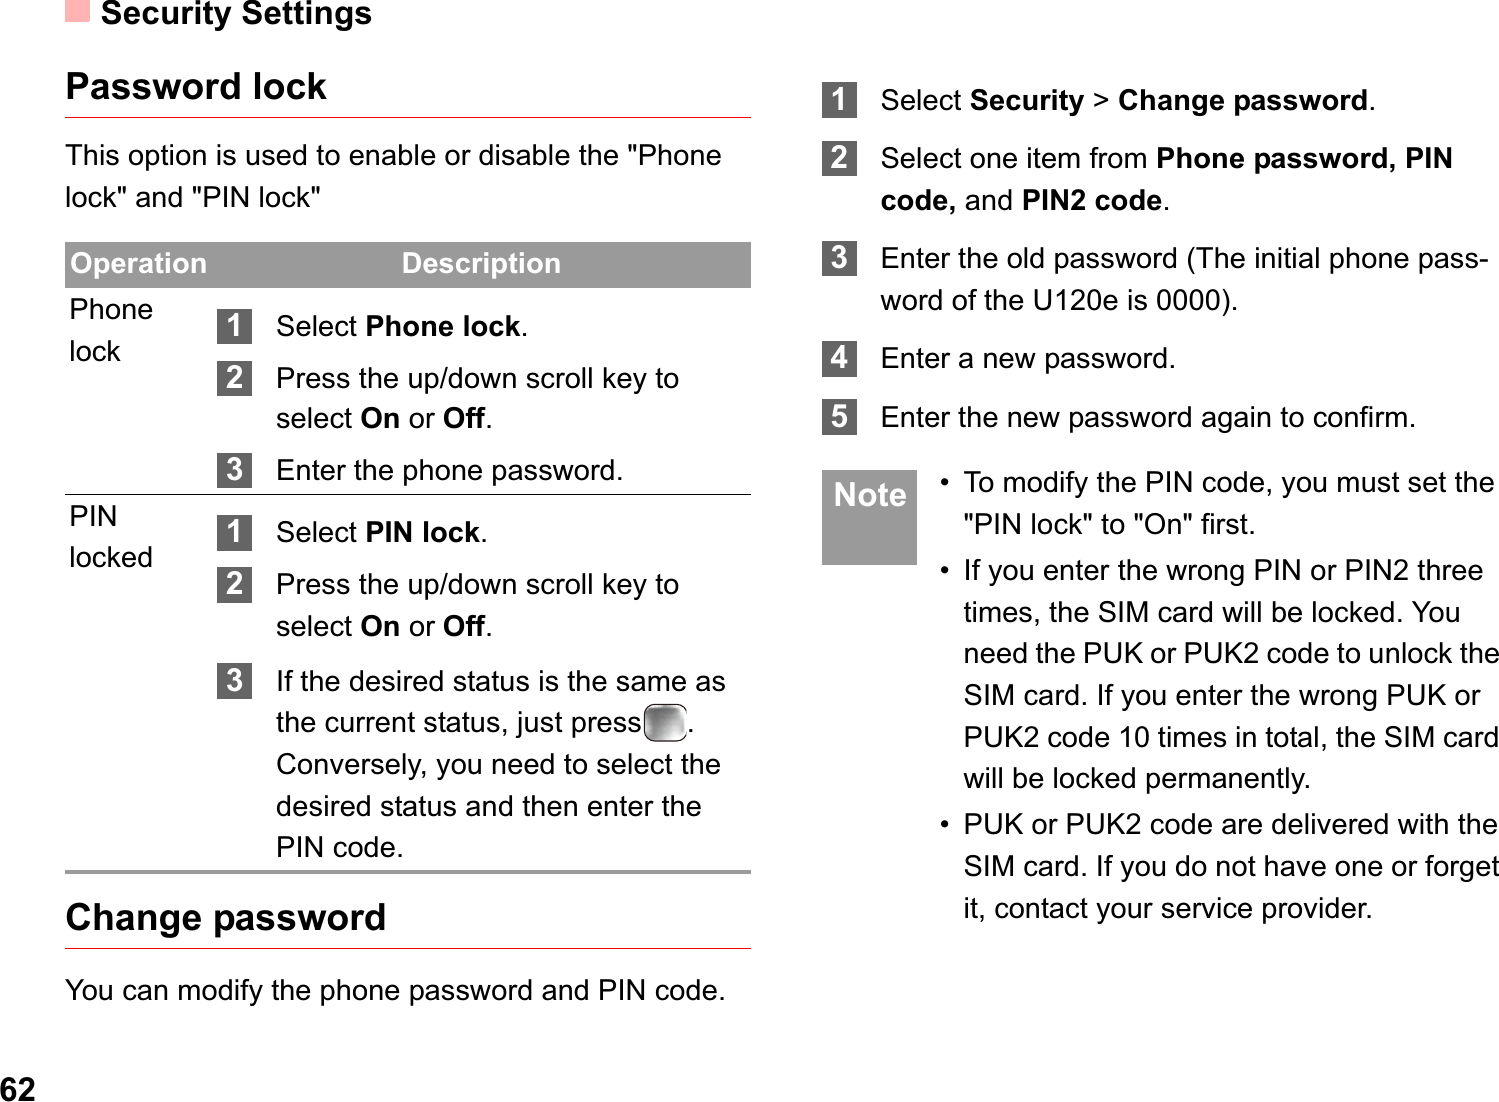 Security Settings62Password lockThis option is used to enable or disable the &quot;Phone lock&quot; and &quot;PIN lock&quot;Change passwordYou can modify the phone password and PIN code.1Select Security &gt;Change password.2Select one item from Phone password, PIN code, and PIN2 code.3Enter the old password (The initial phone pass-word of the U120e is 0000).4Enter a new password.5Enter the new password again to confirm. Note • To modify the PIN code, you must set the &quot;PIN lock&quot; to &quot;On&quot; first.• If you enter the wrong PIN or PIN2 three times, the SIM card will be locked. You need the PUK or PUK2 code to unlock the SIM card. If you enter the wrong PUK or PUK2 code 10 times in total, the SIM card will be locked permanently.• PUK or PUK2 code are delivered with the SIM card. If you do not have one or forget it, contact your service provider.Operation DescriptionPhone lock 1Select Phone lock.2Press the up/down scroll key to select On or Off.3Enter the phone password.PIN locked 1Select PIN lock.2Press the up/down scroll key to select On or Off.3If the desired status is the same as the current status, just press . Conversely, you need to select the desired status and then enter the PIN code.